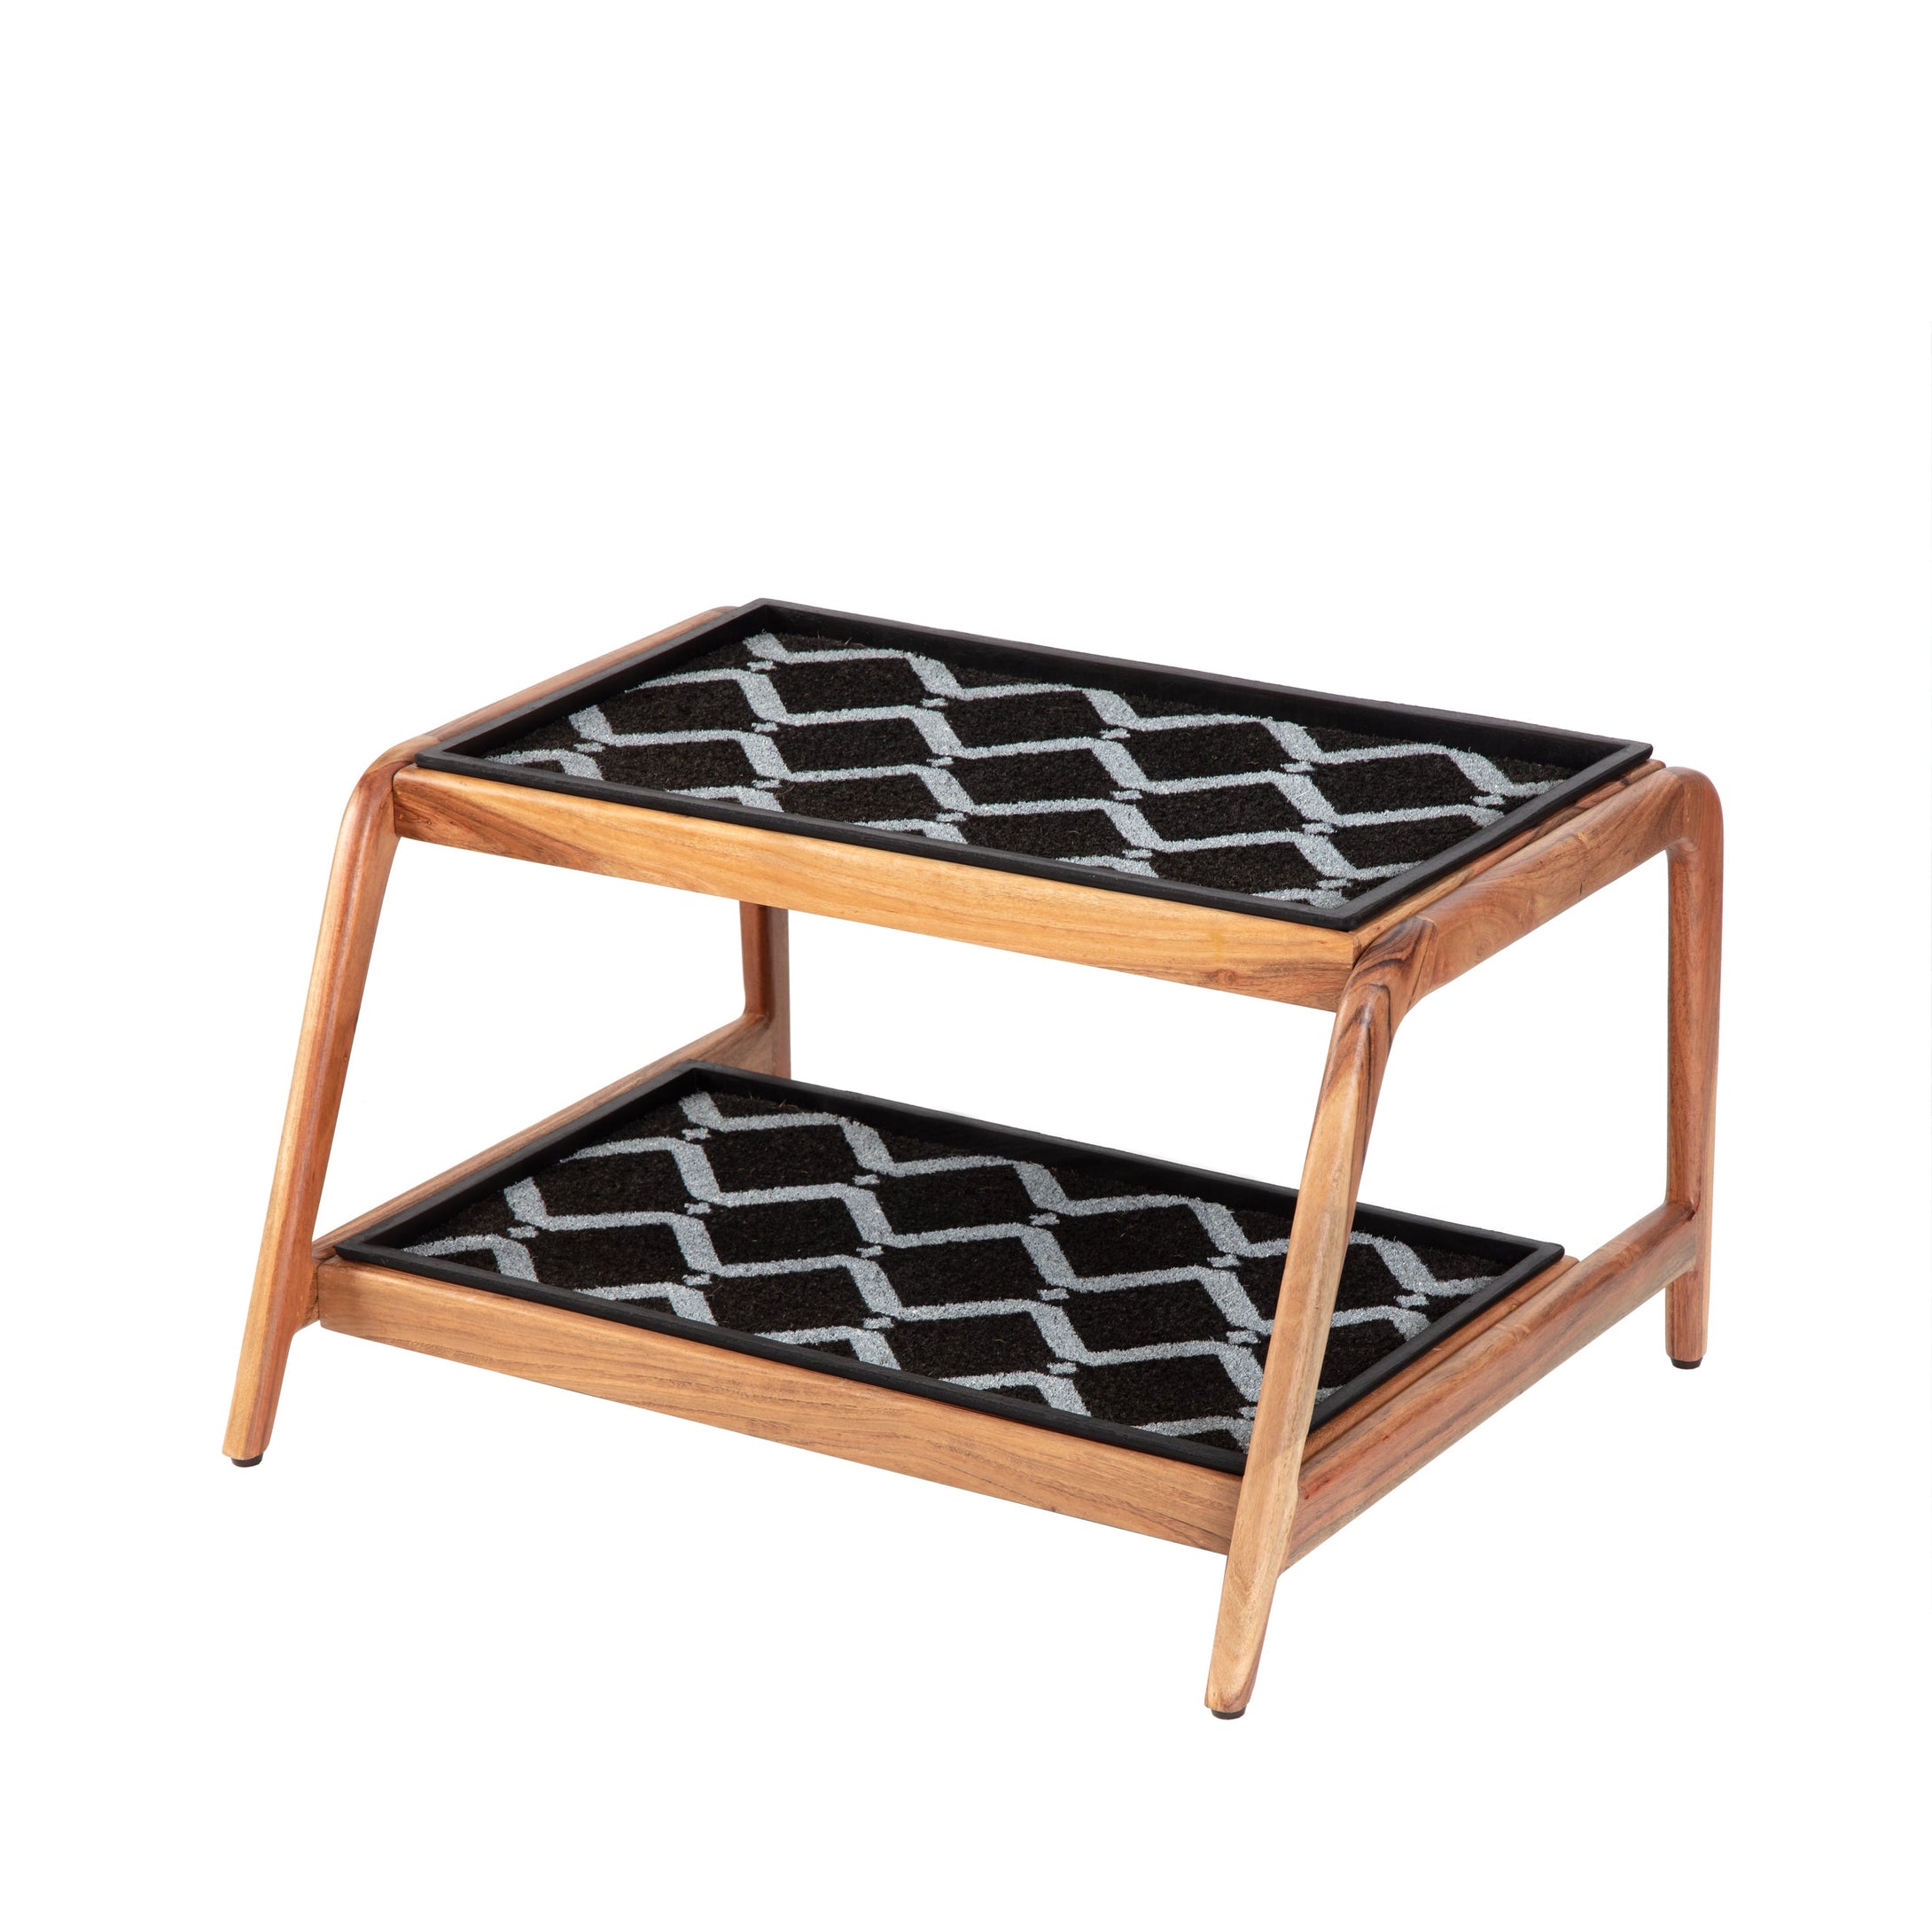 Wooden Boot Tray (Double Tier) - San Tropez (014)